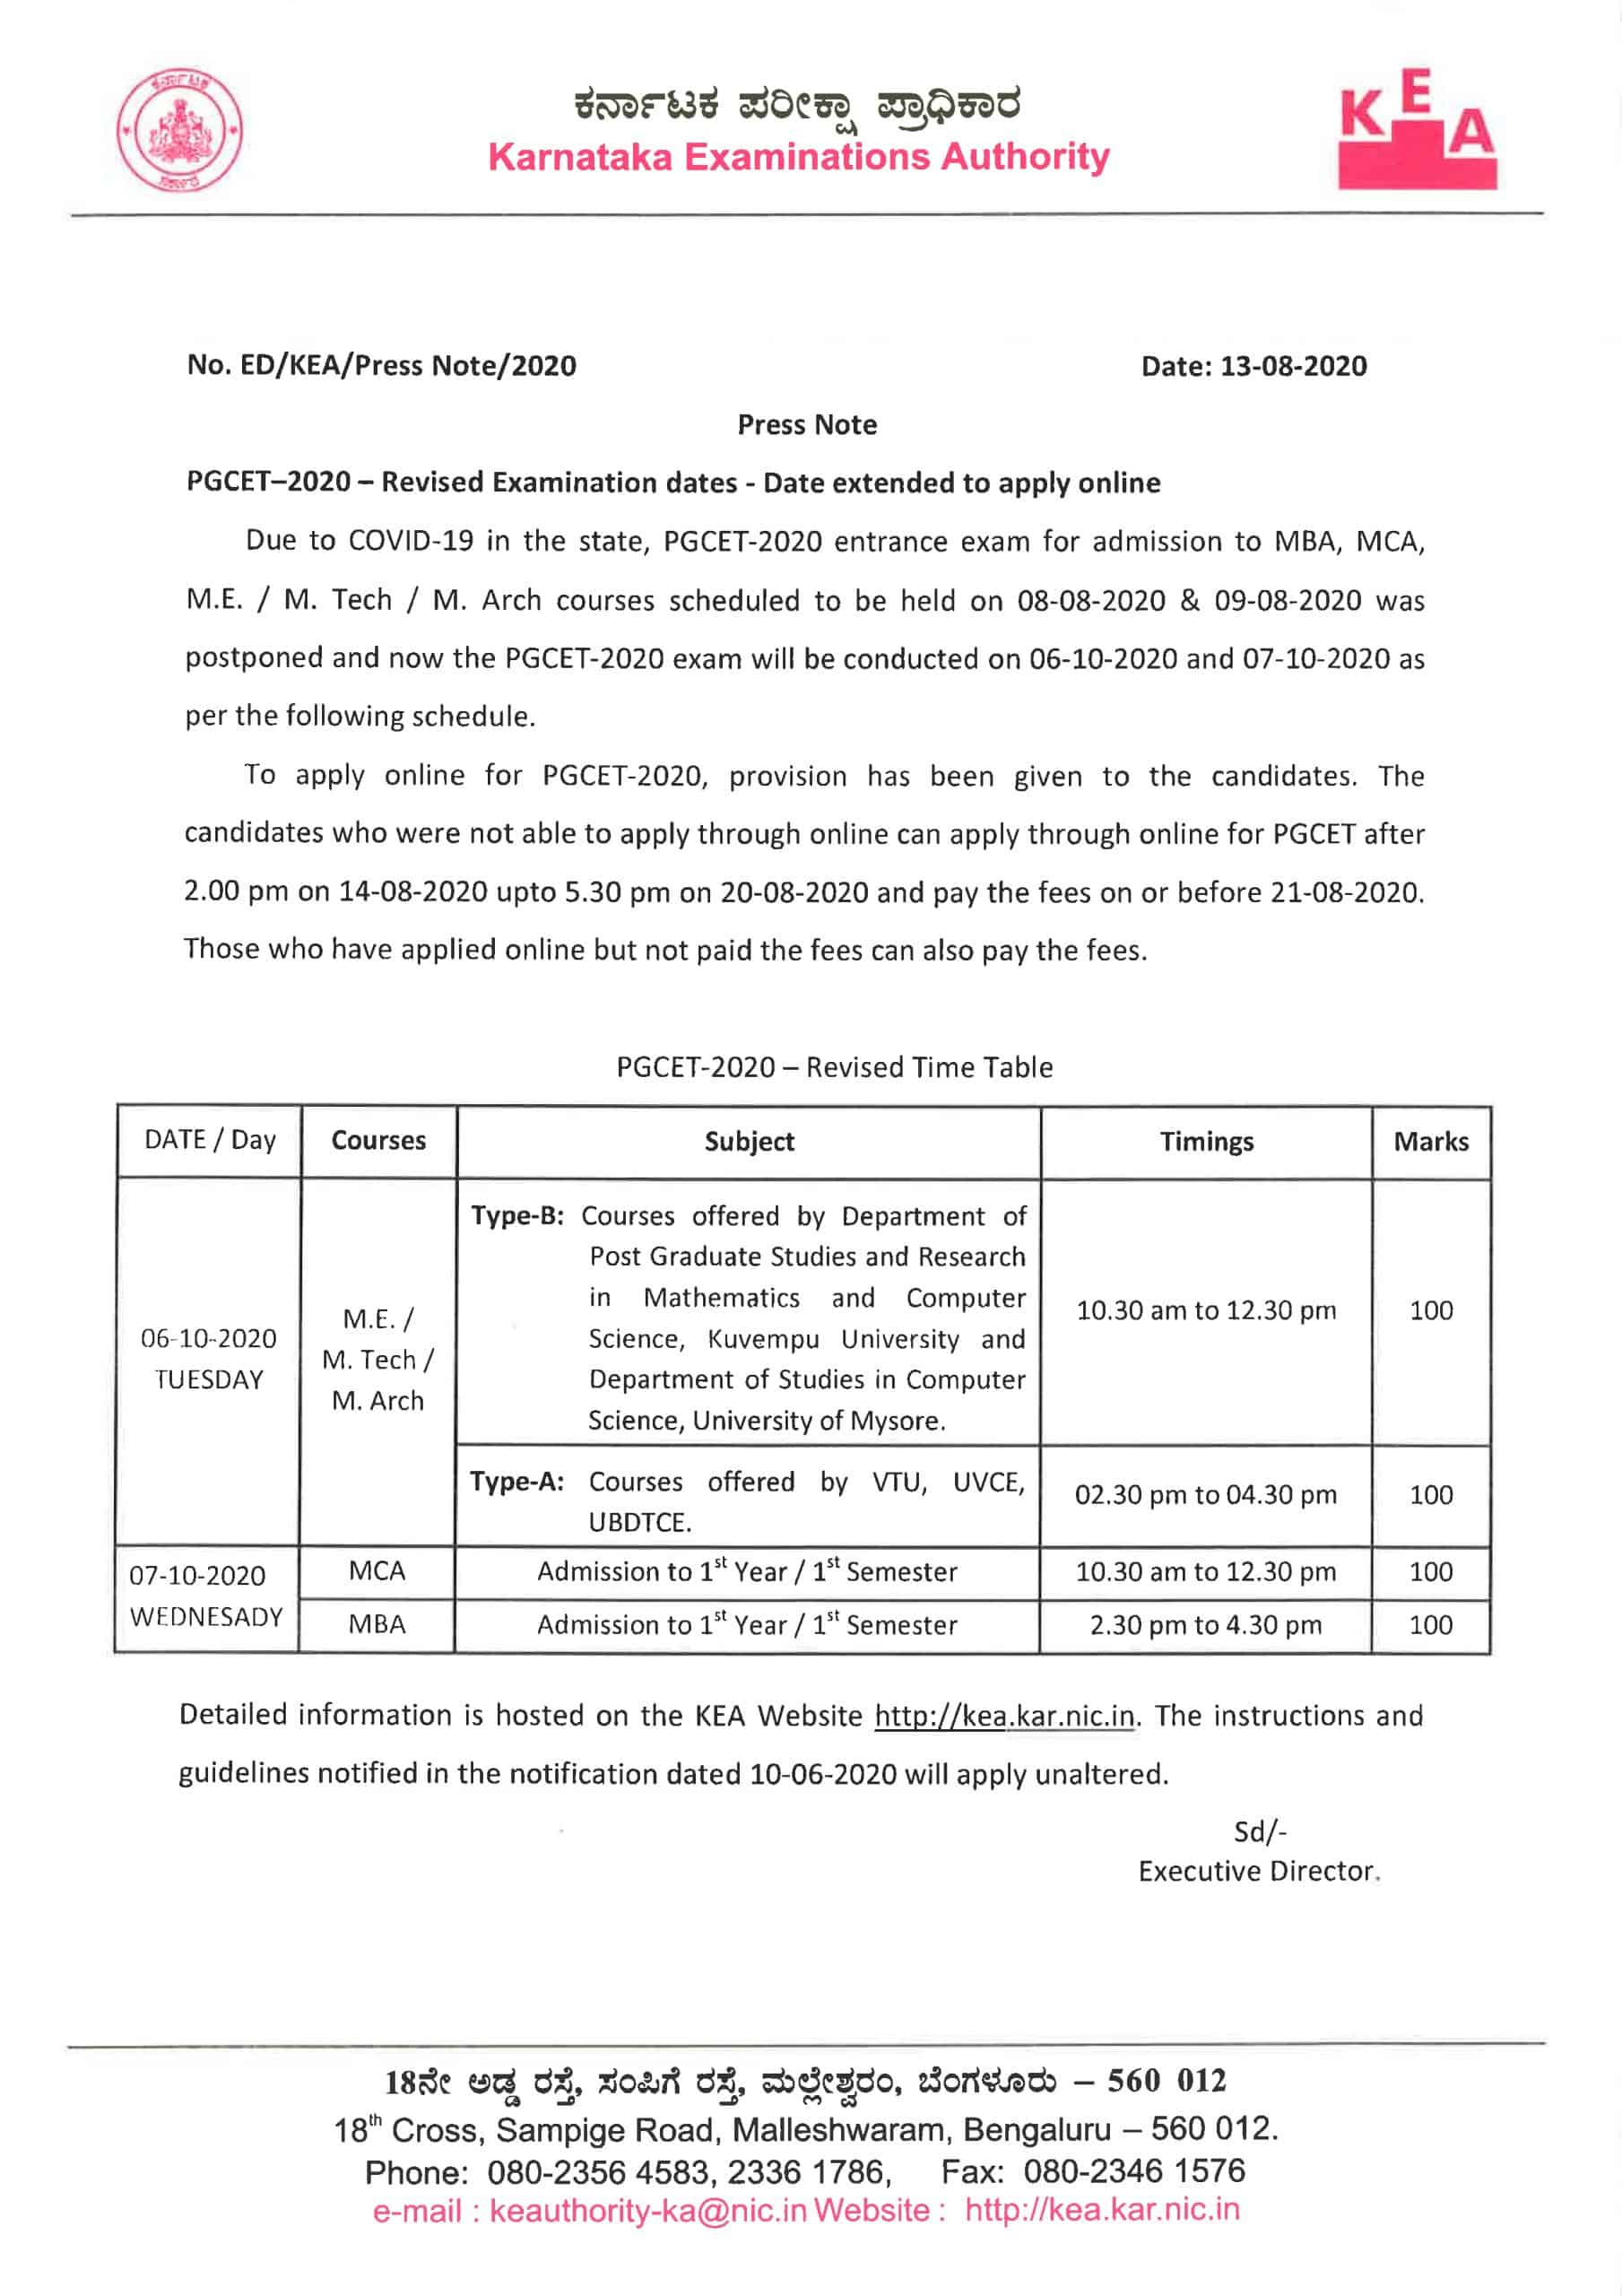 PGCET – 2020 – Revised Examination dates – Date extended to apply online